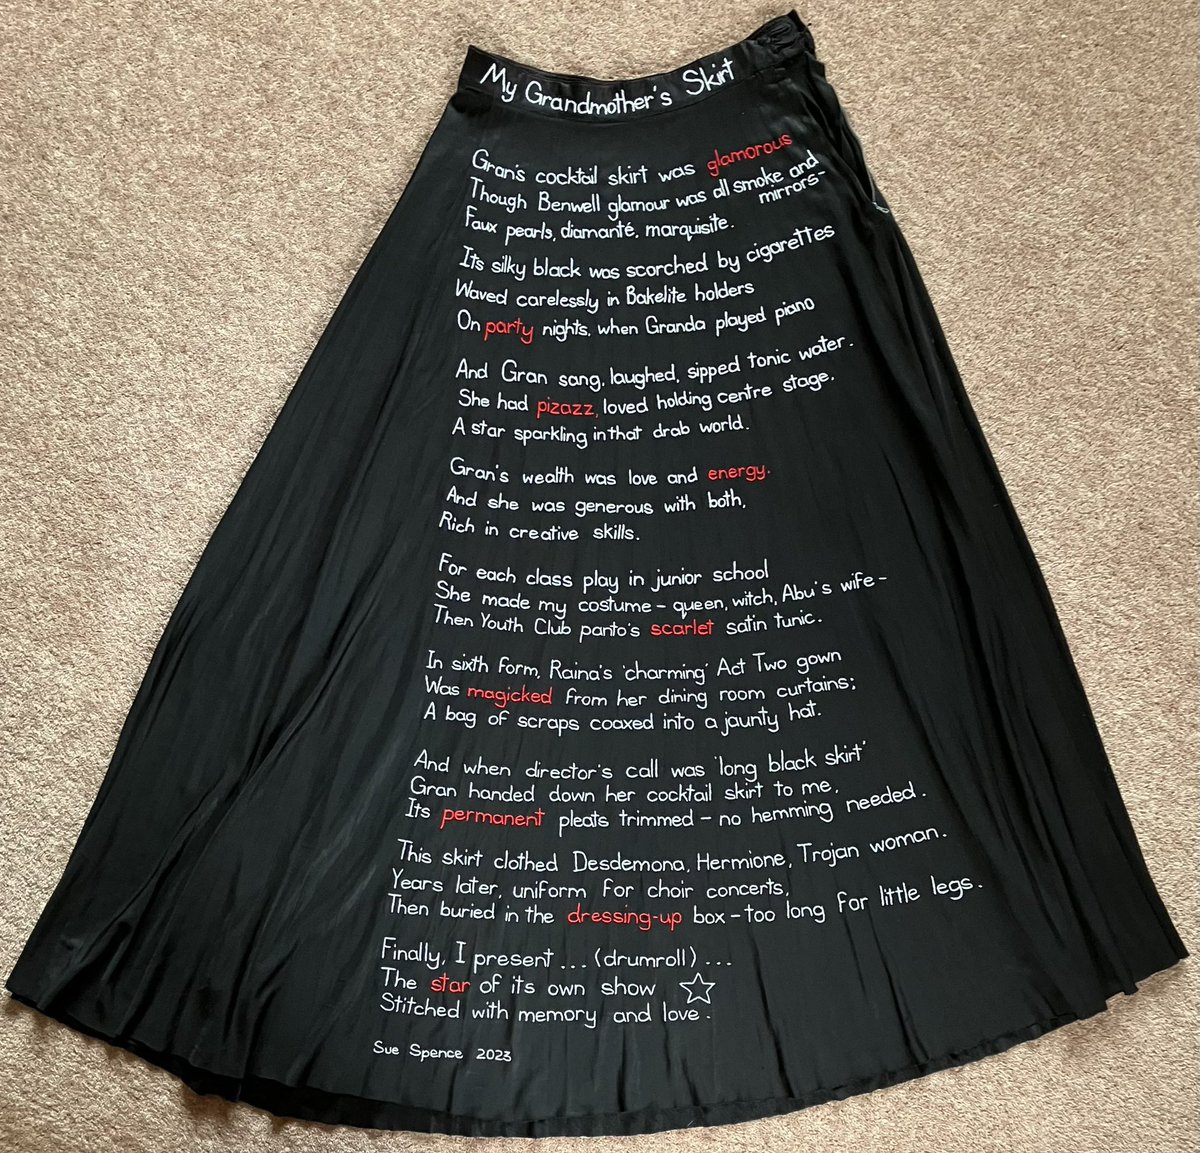 ‘My Grandmother’s Skirt’ - my poem celebrating an old black skirt & Gran who gave it to me - has been hand embroidered on that very skirt, with the final stitch going just now. But with 6 days to spare for my 💯 day project, maybe I can stitch a quick postscript on the reverse?